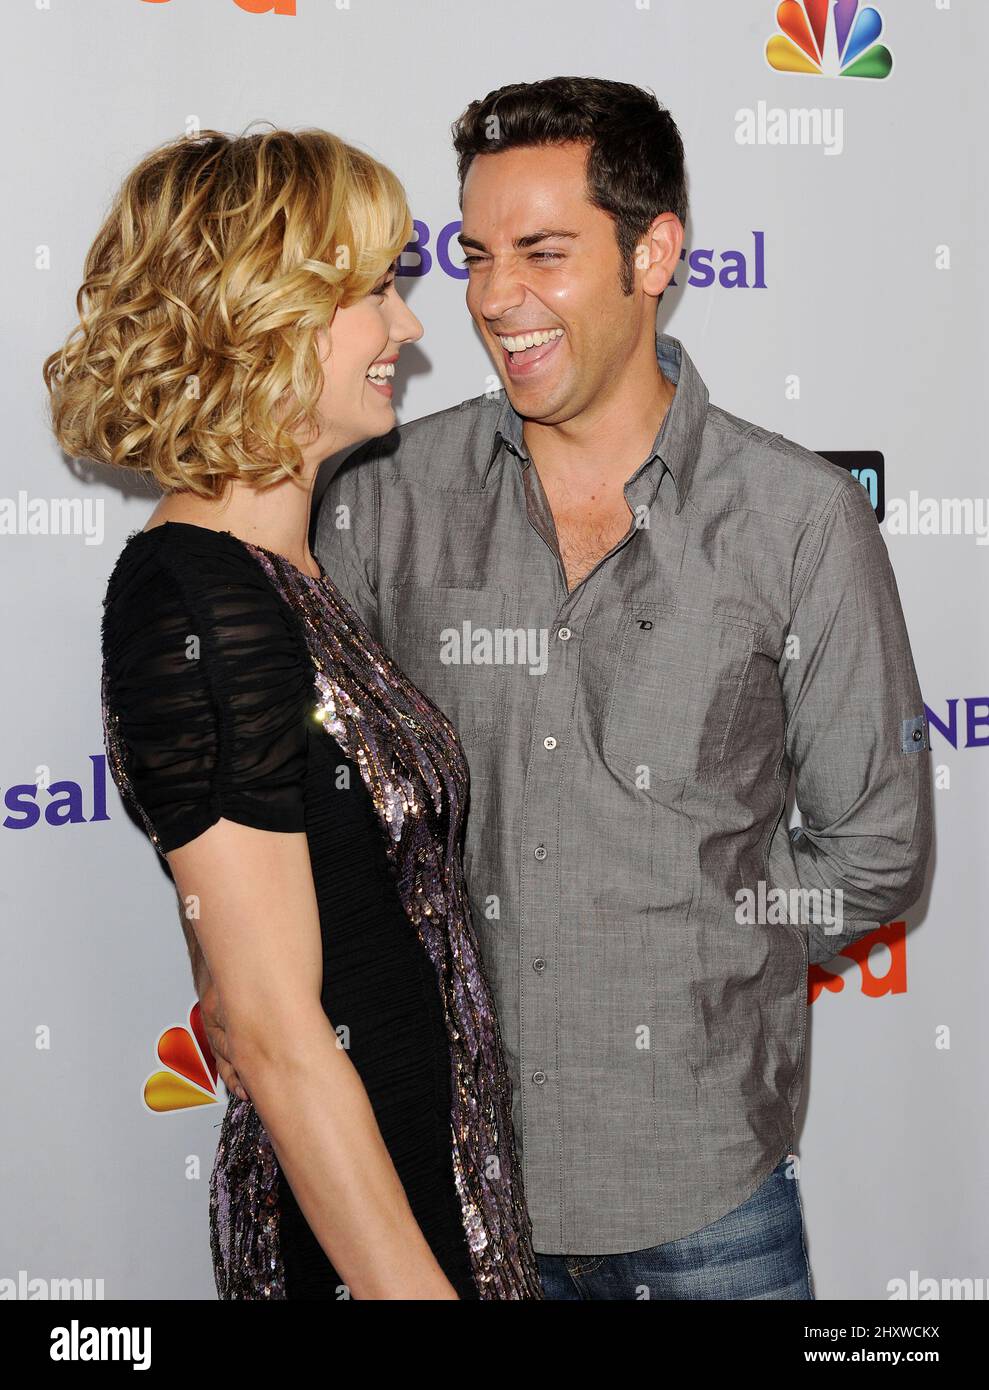 Yvonne Strahovski and Zachary Levi during the NBC Universal Press Tour All  Star Party held at the The Bazaar at the SLS Hotel, California Stock Photo  - Alamy